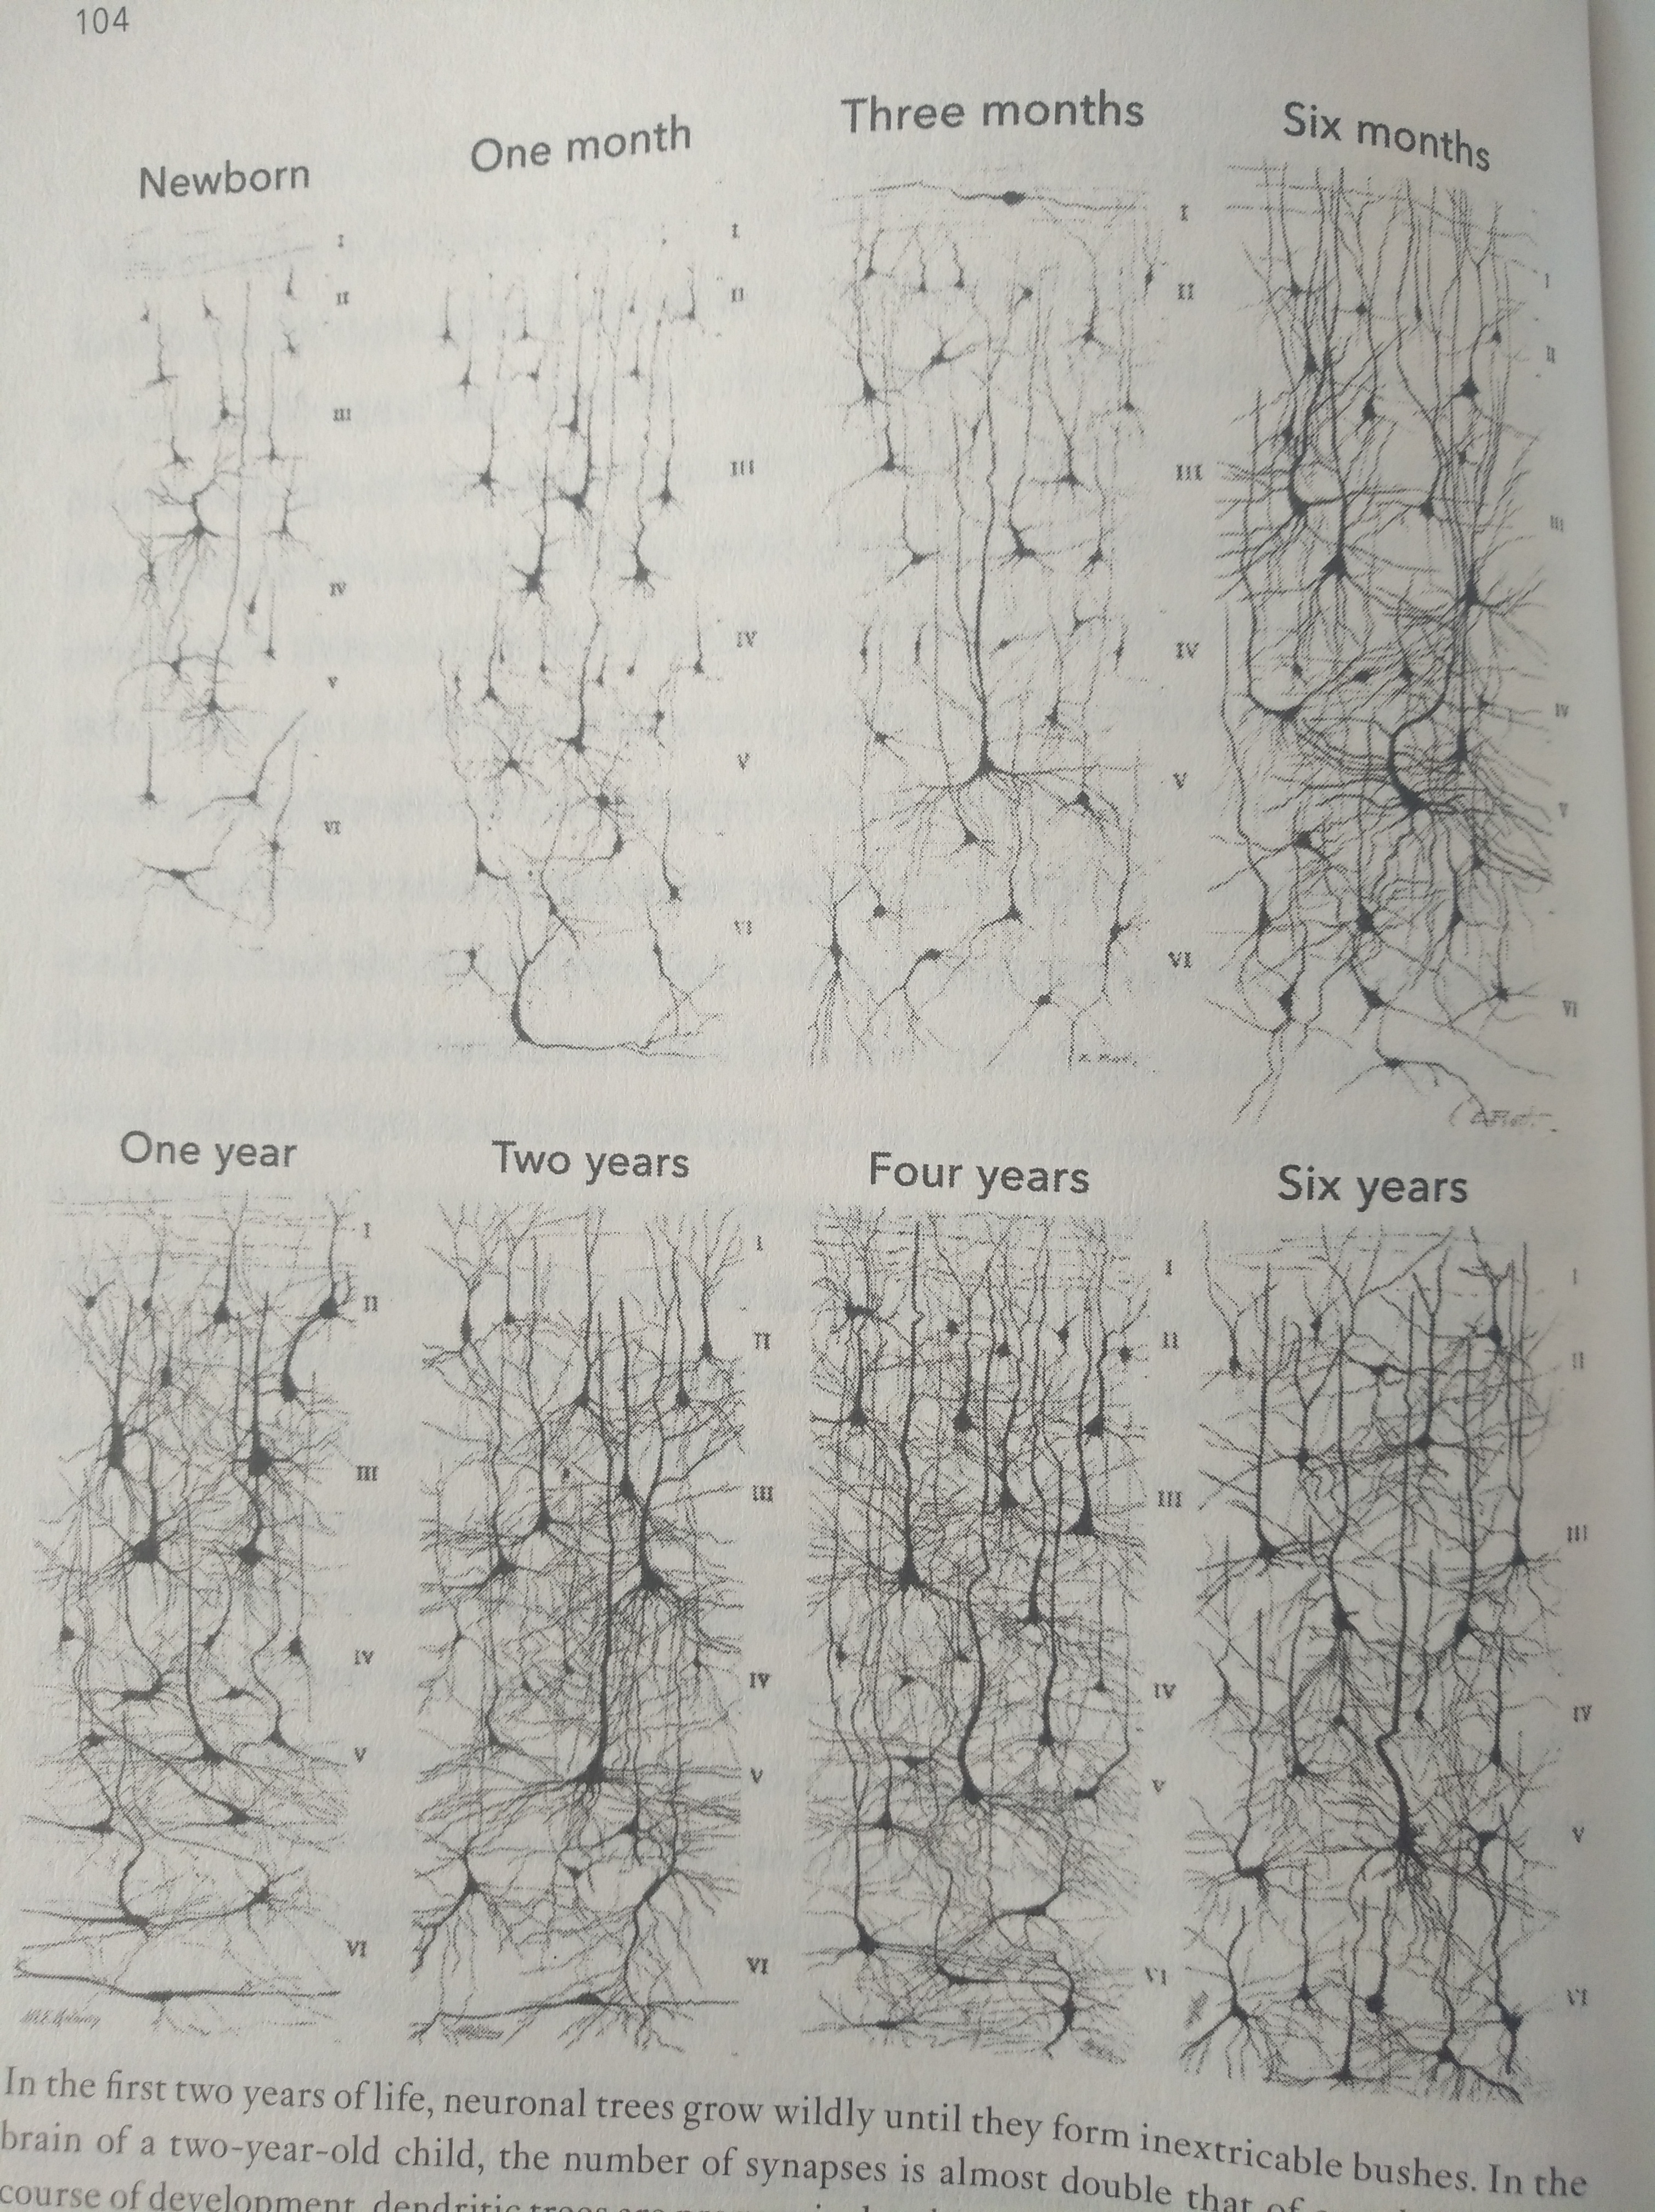 In the first two years of life, neural trees grow
     wildly until they form inextricable bushes. In the brain of a two
     year old child, the number of synapses is almost double that of
     an adult. In the course of development, dendritic tress are
     progressively trimmed under the influence of neuronal
     activity. Useful synapses are preserved and multiply, while
     unecessary others are eliminated. (p 104)